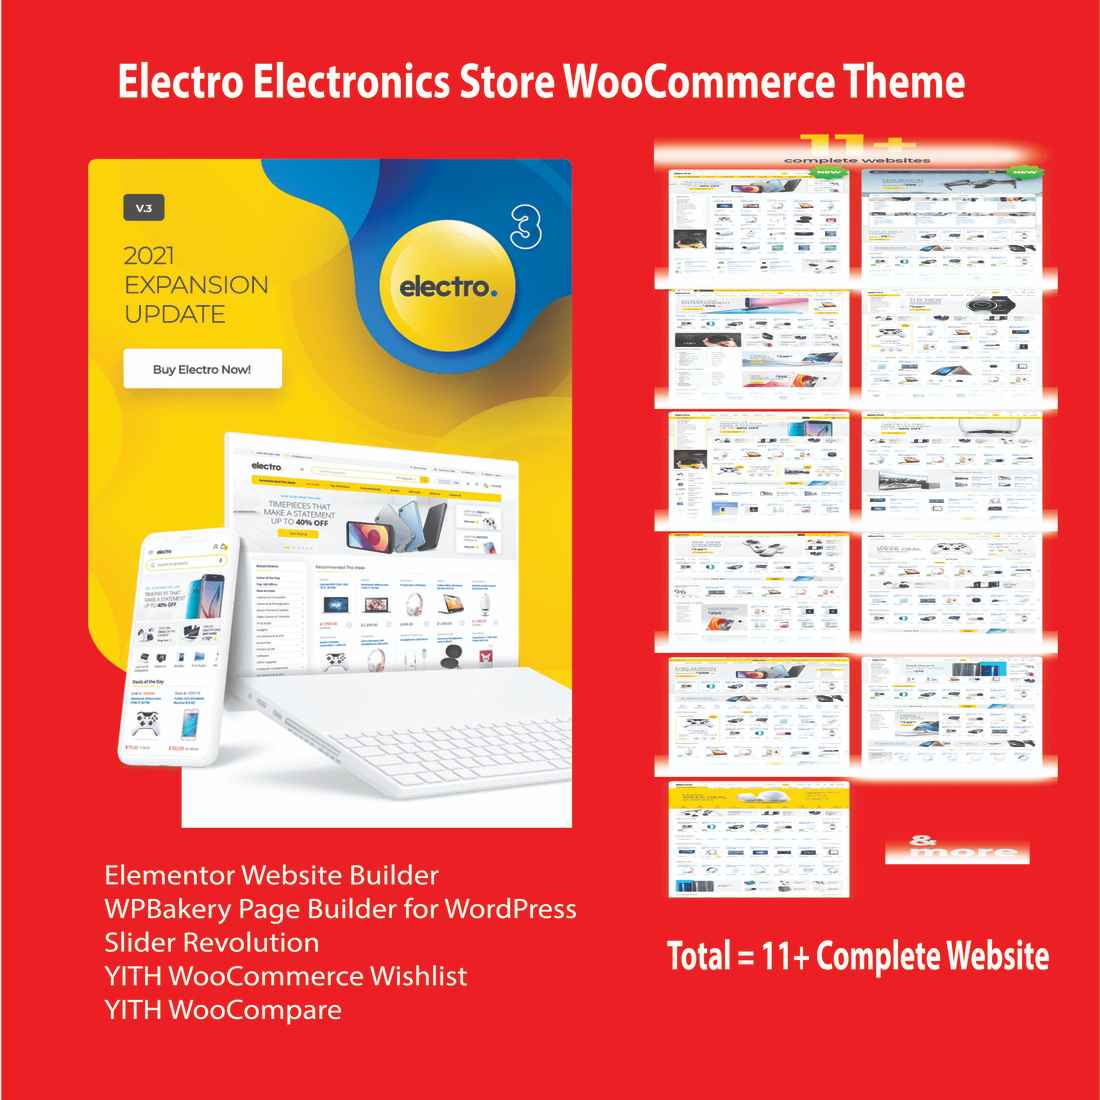 Electro Electronics Store - Woo Commerce Theme Total + 11 Complete Website cover image.